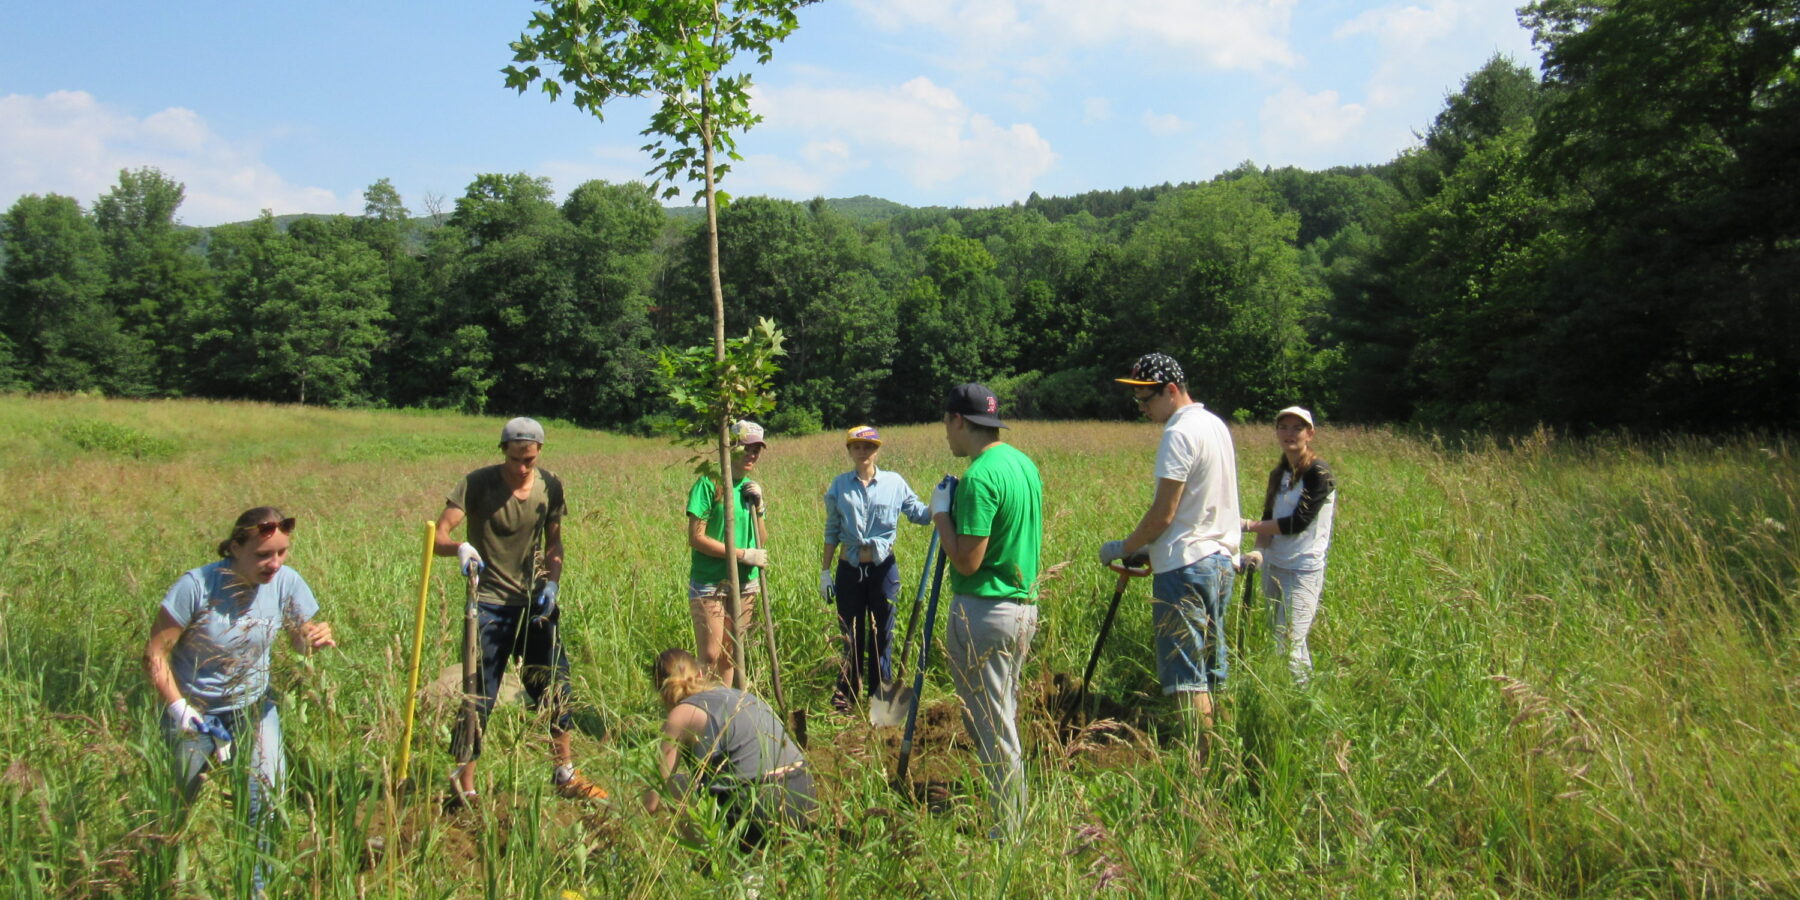 Volunteers plant a tree by the river.